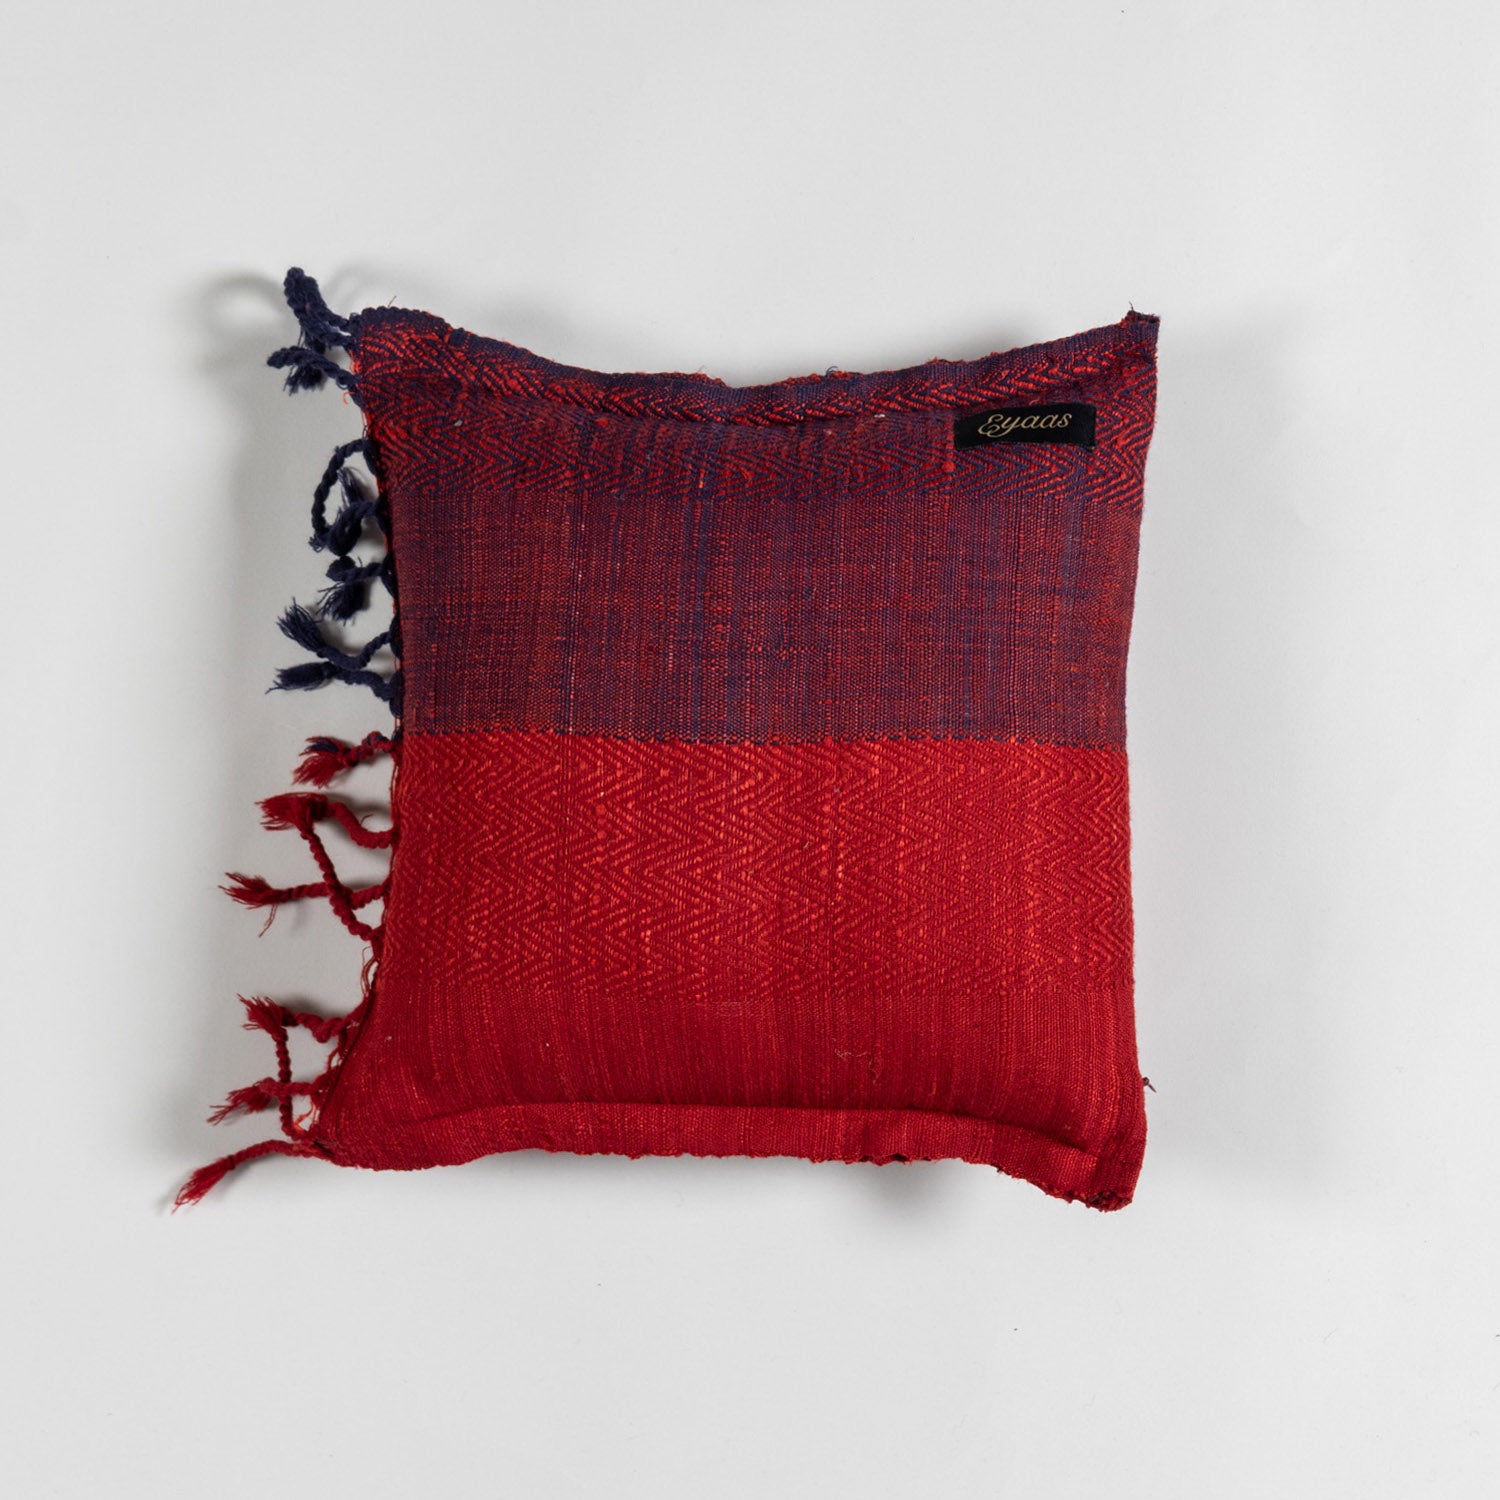 Handwoven Upcycled Red & Blue Wool & Oak Silk Cushion Cover - 12x12